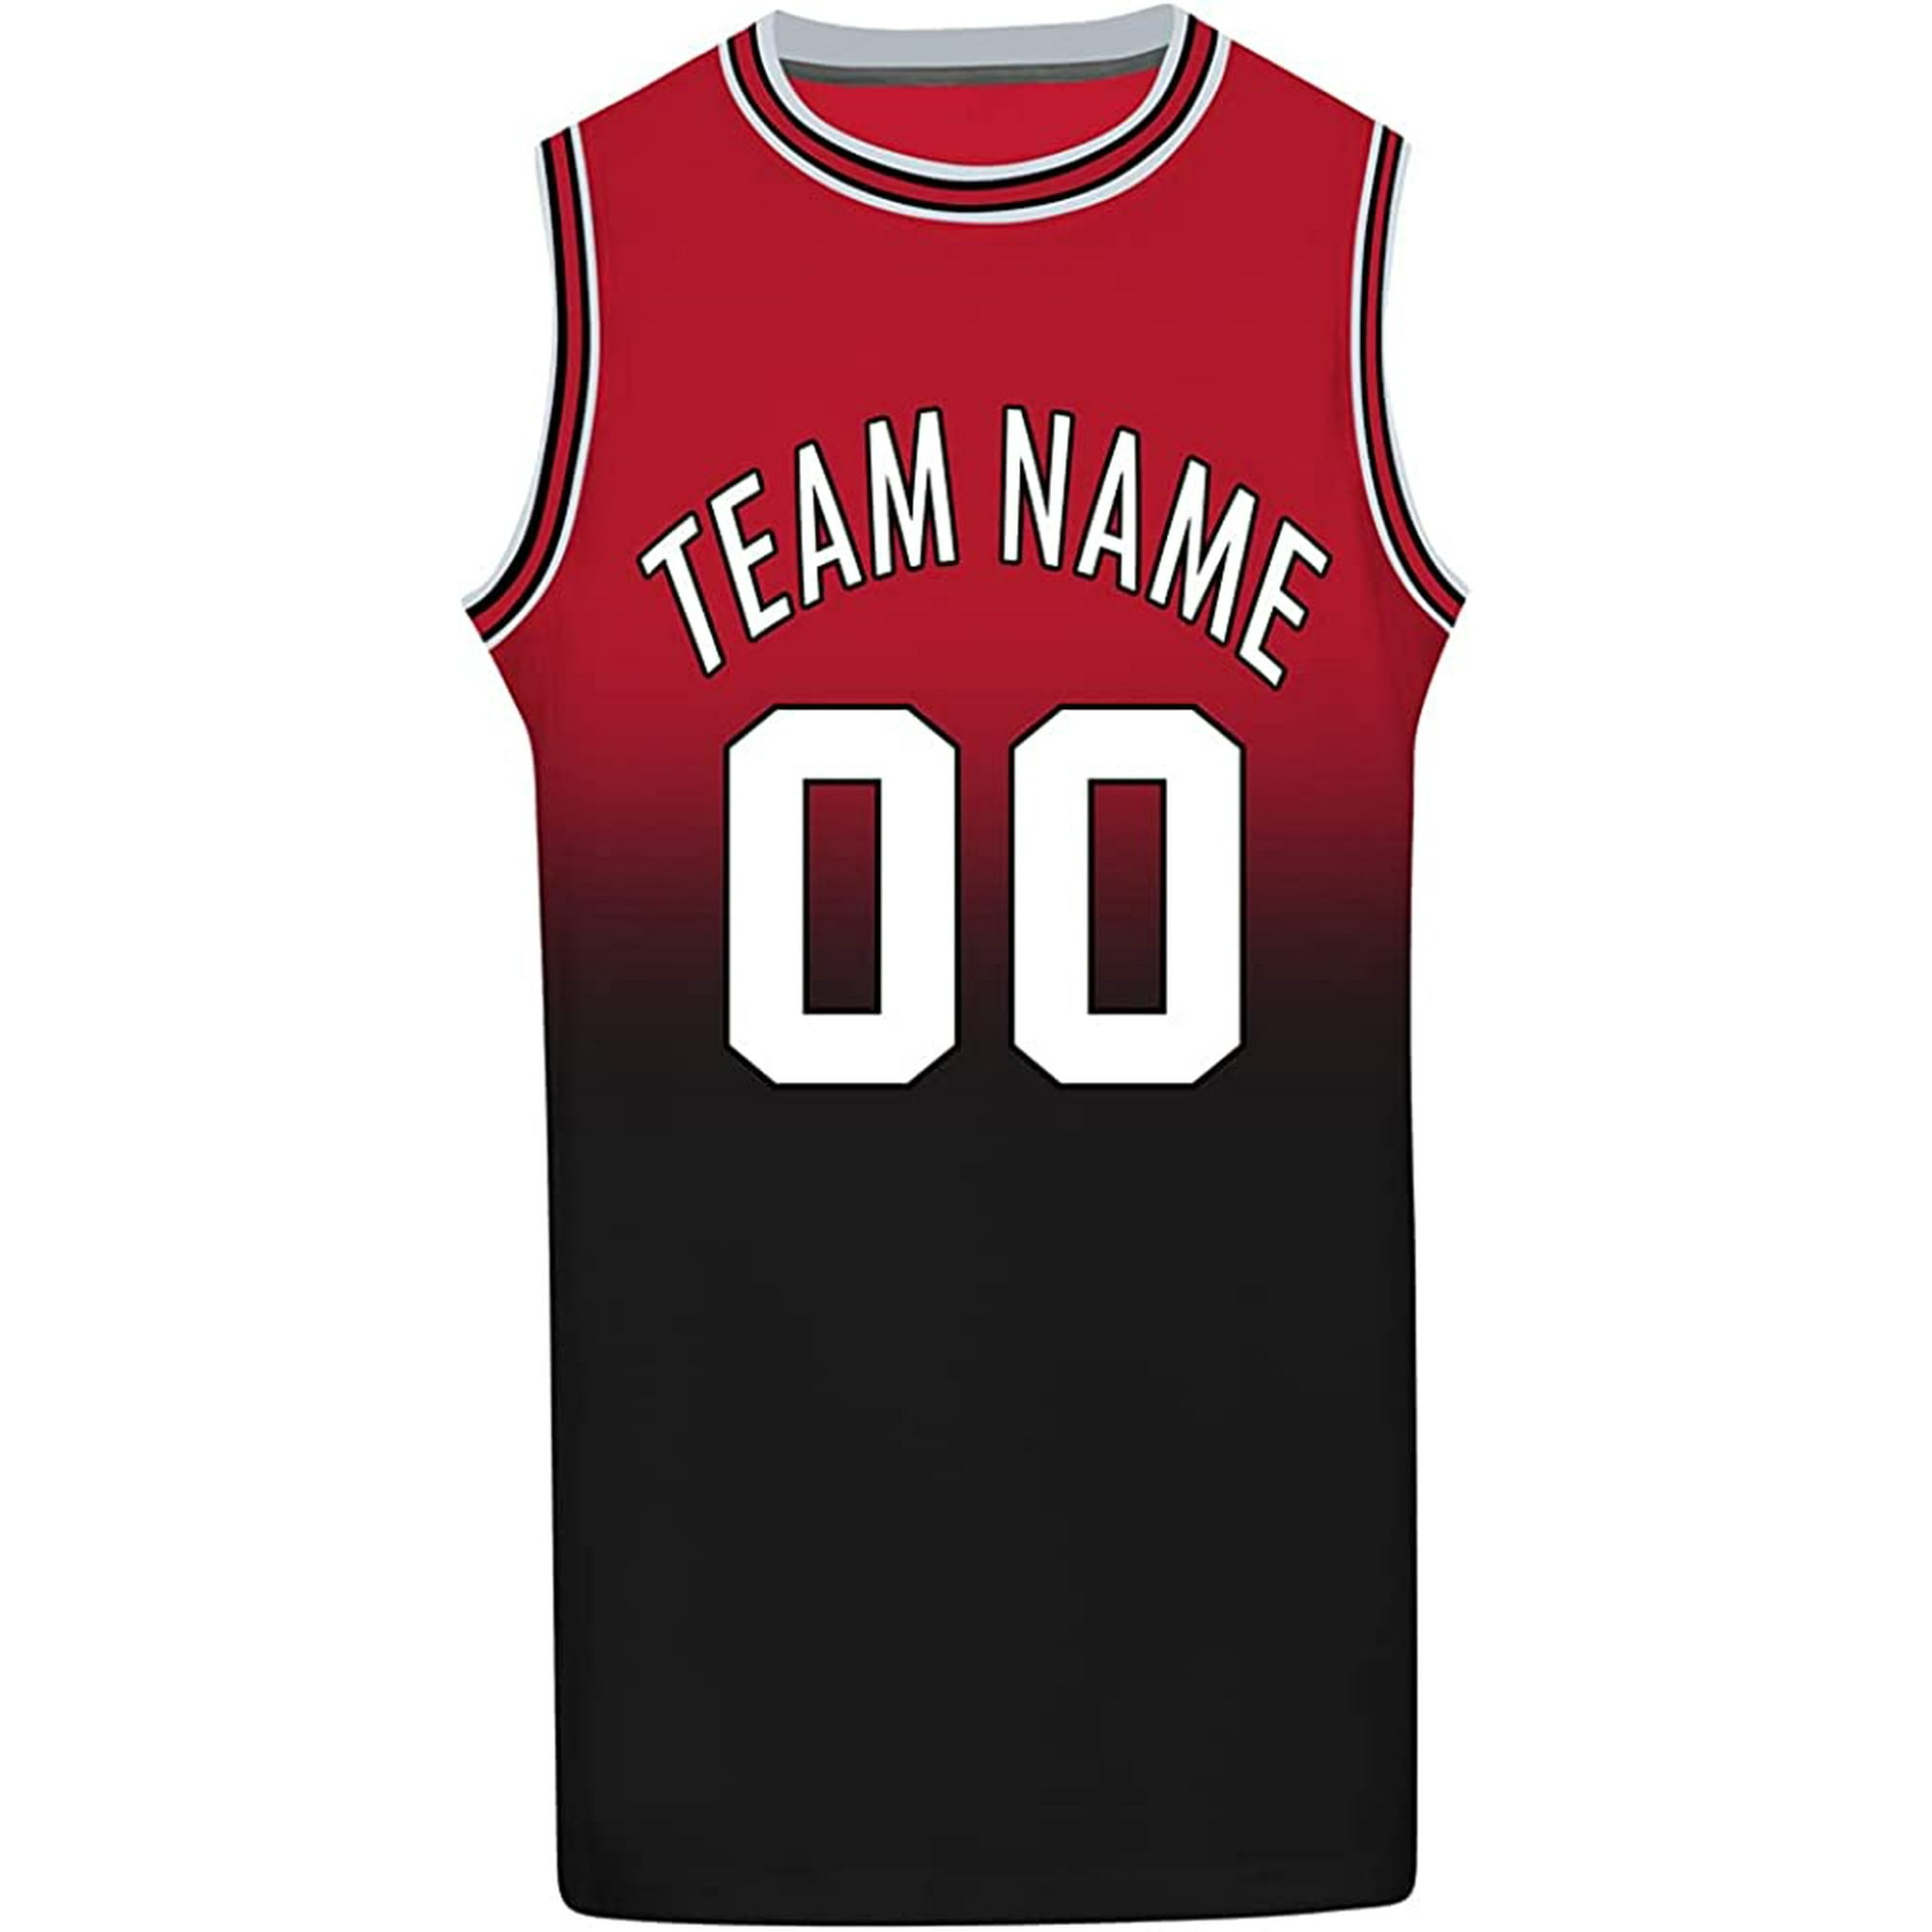  Custom Basketball Jersey Stitched/Printed Number